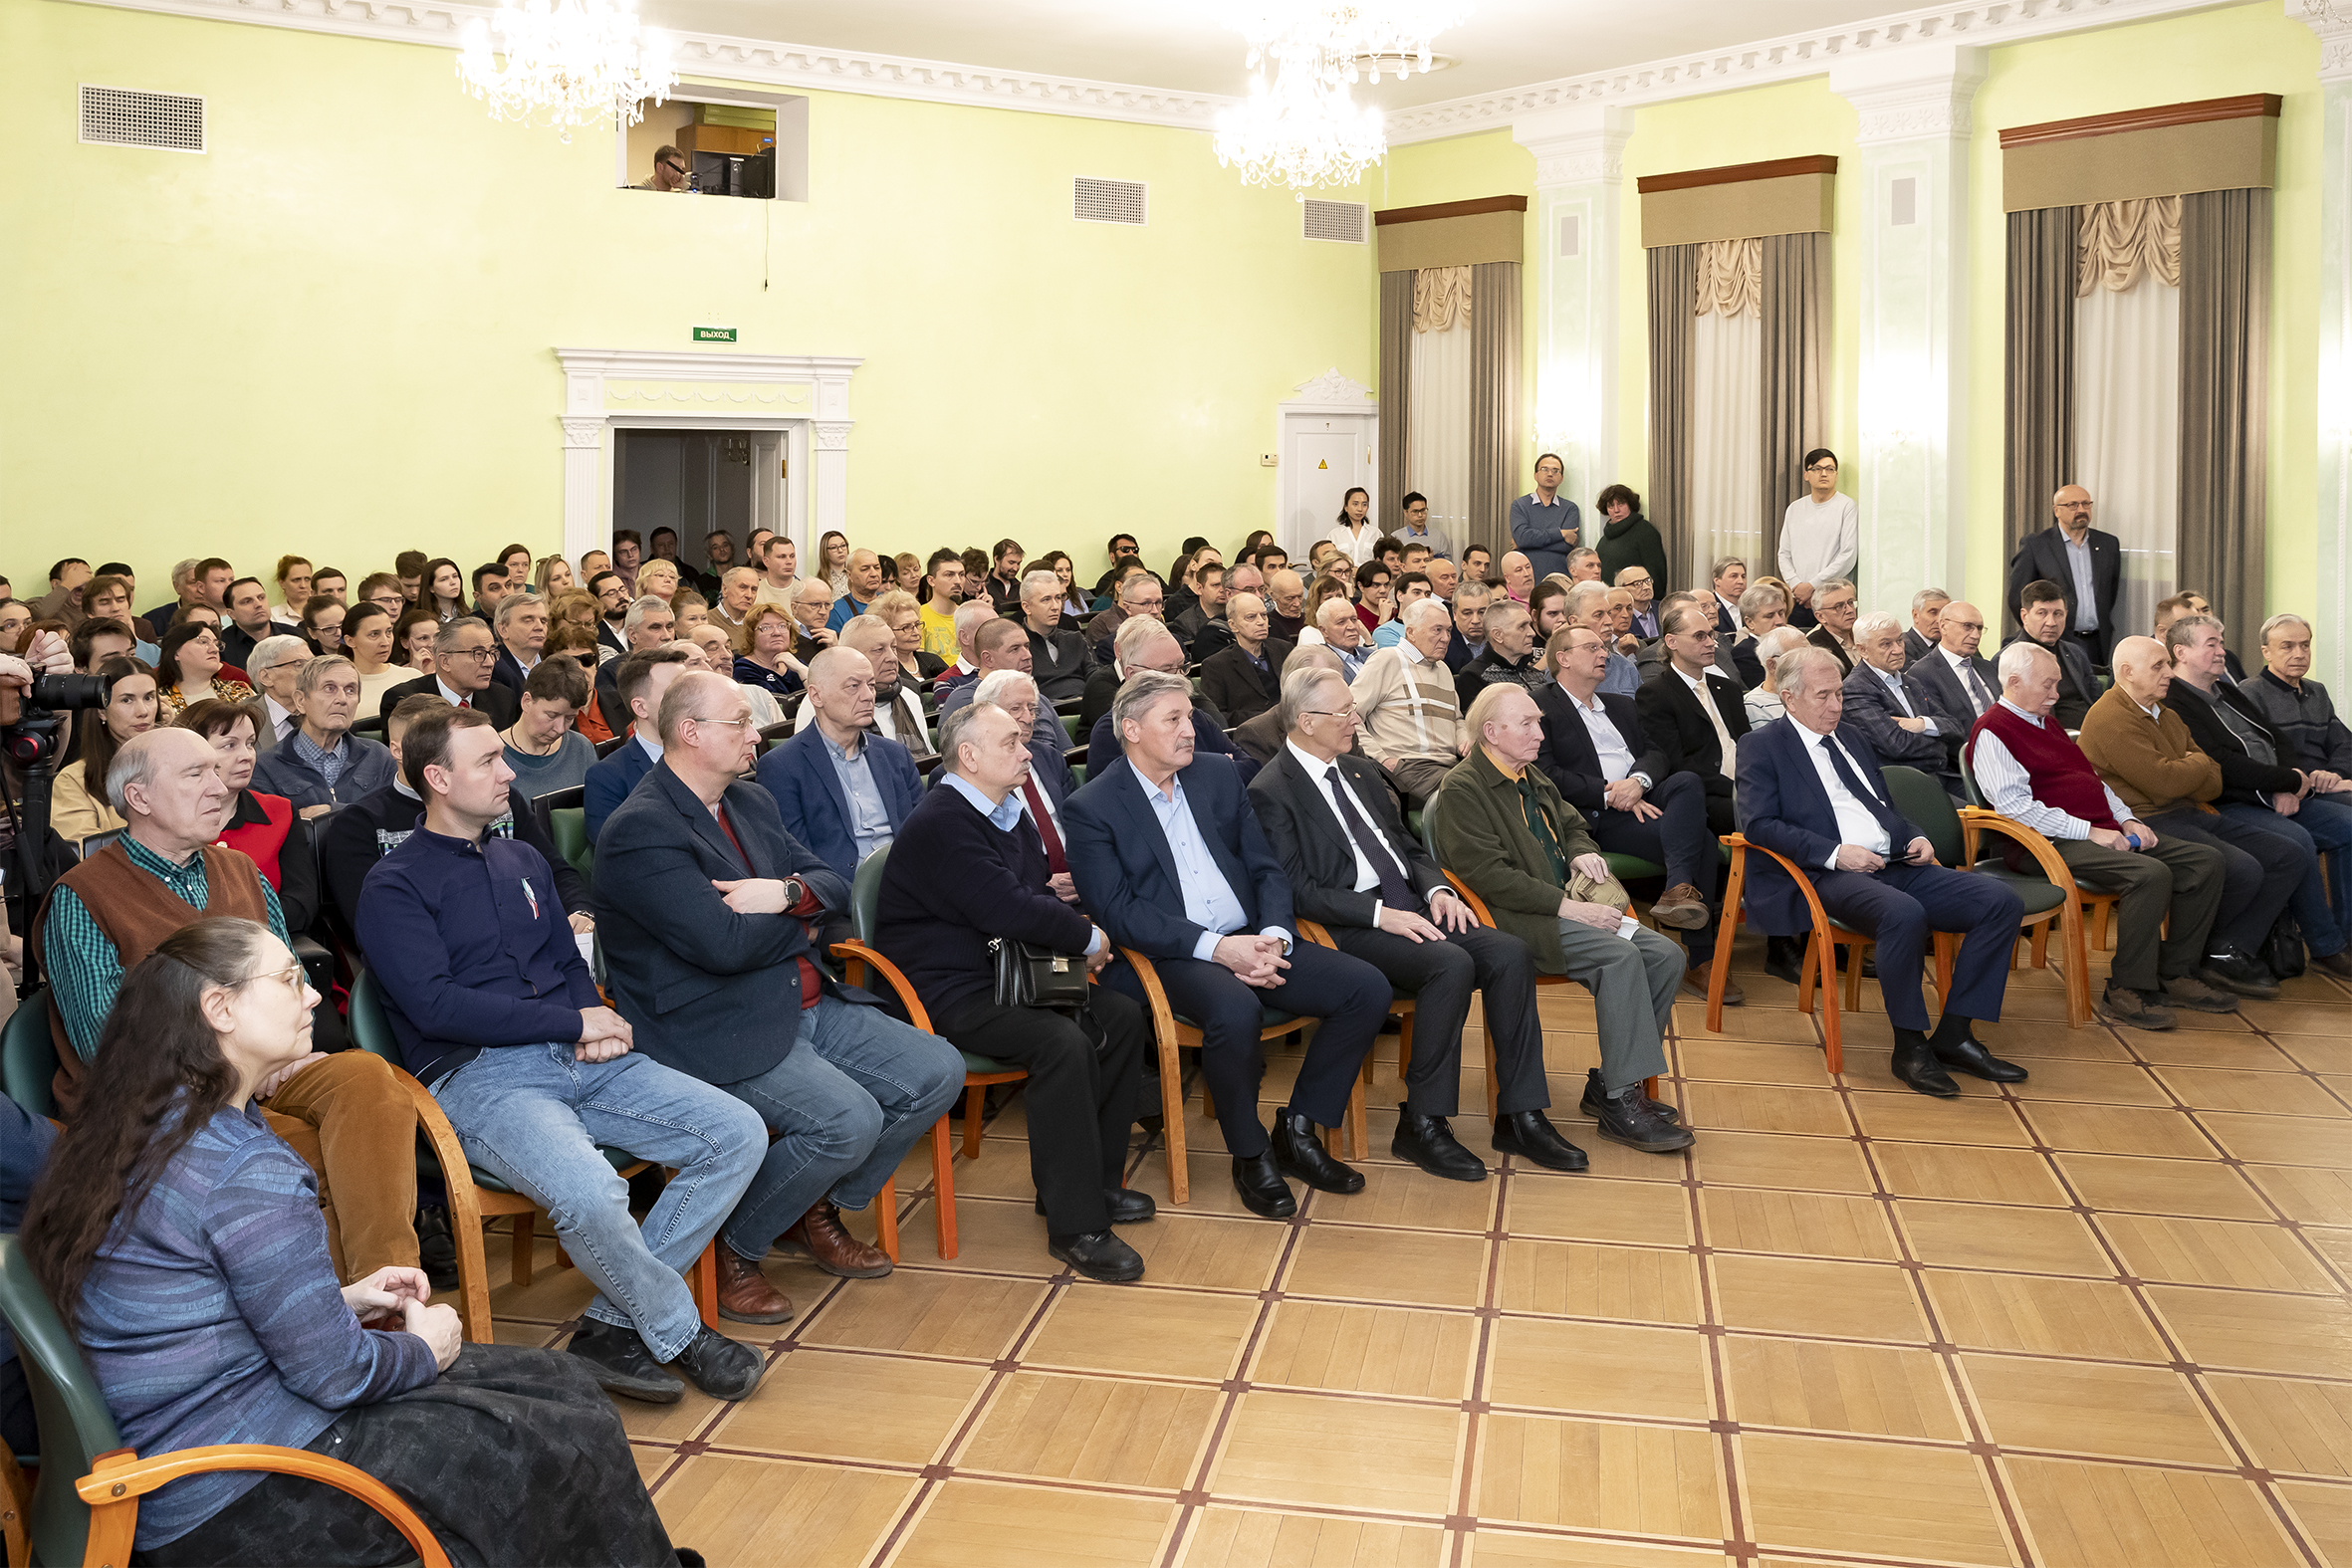 On Friday, 15 March, a ceremonial seminar dedicated to the 40th anniversary of the commissioning of the IBR-2 reactor was held at the JINR Scientists’ Club